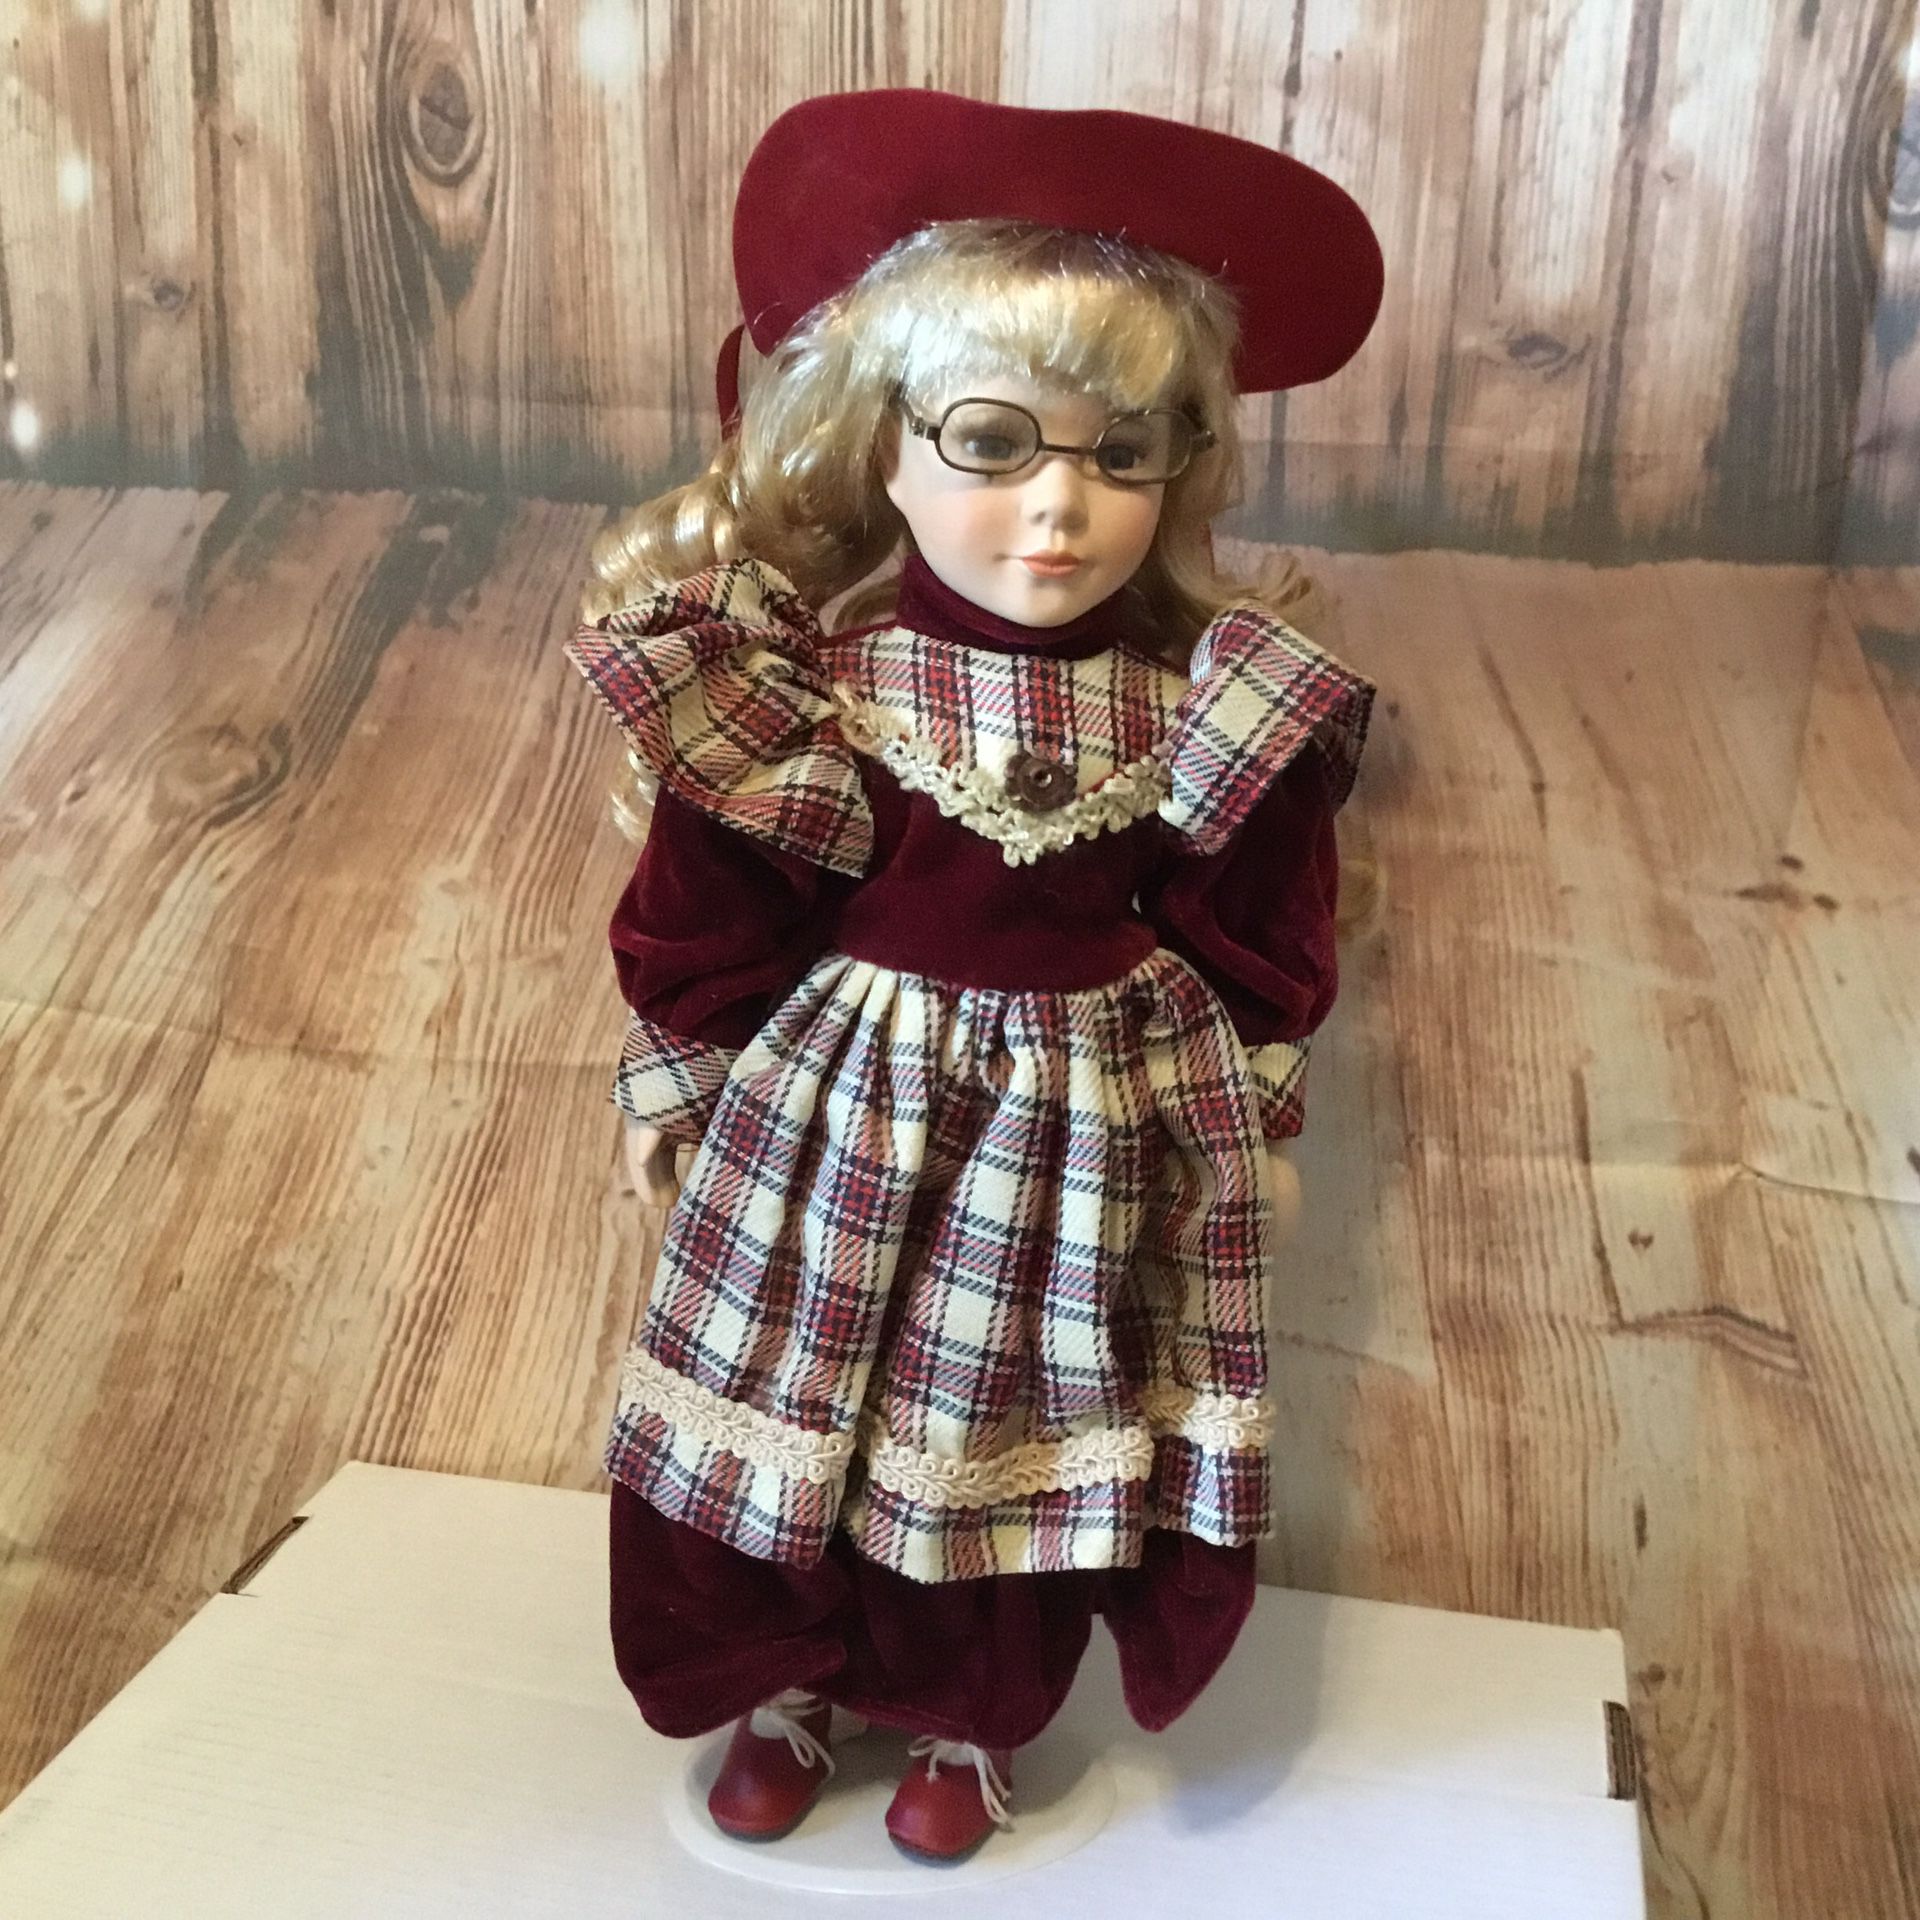 The Ashley Bella collection Porcelain doll 16” “Norma” Limited Edition